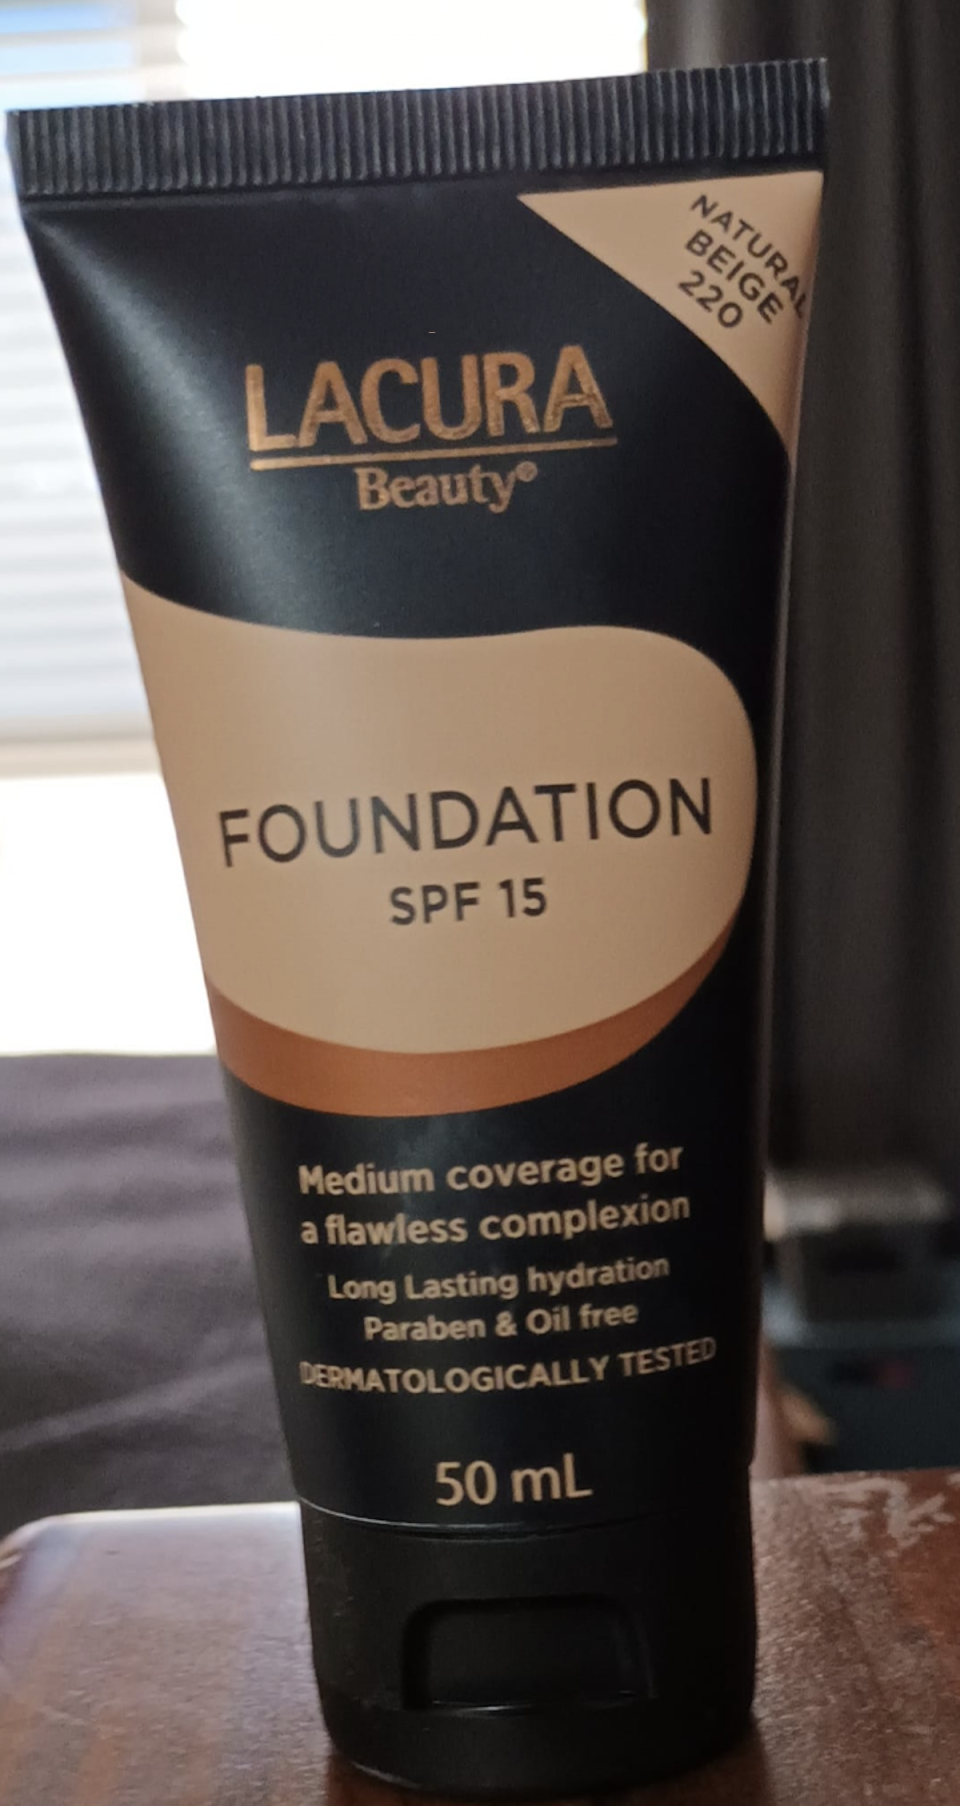 The Lacura foundation from Aldi retailed at around $6